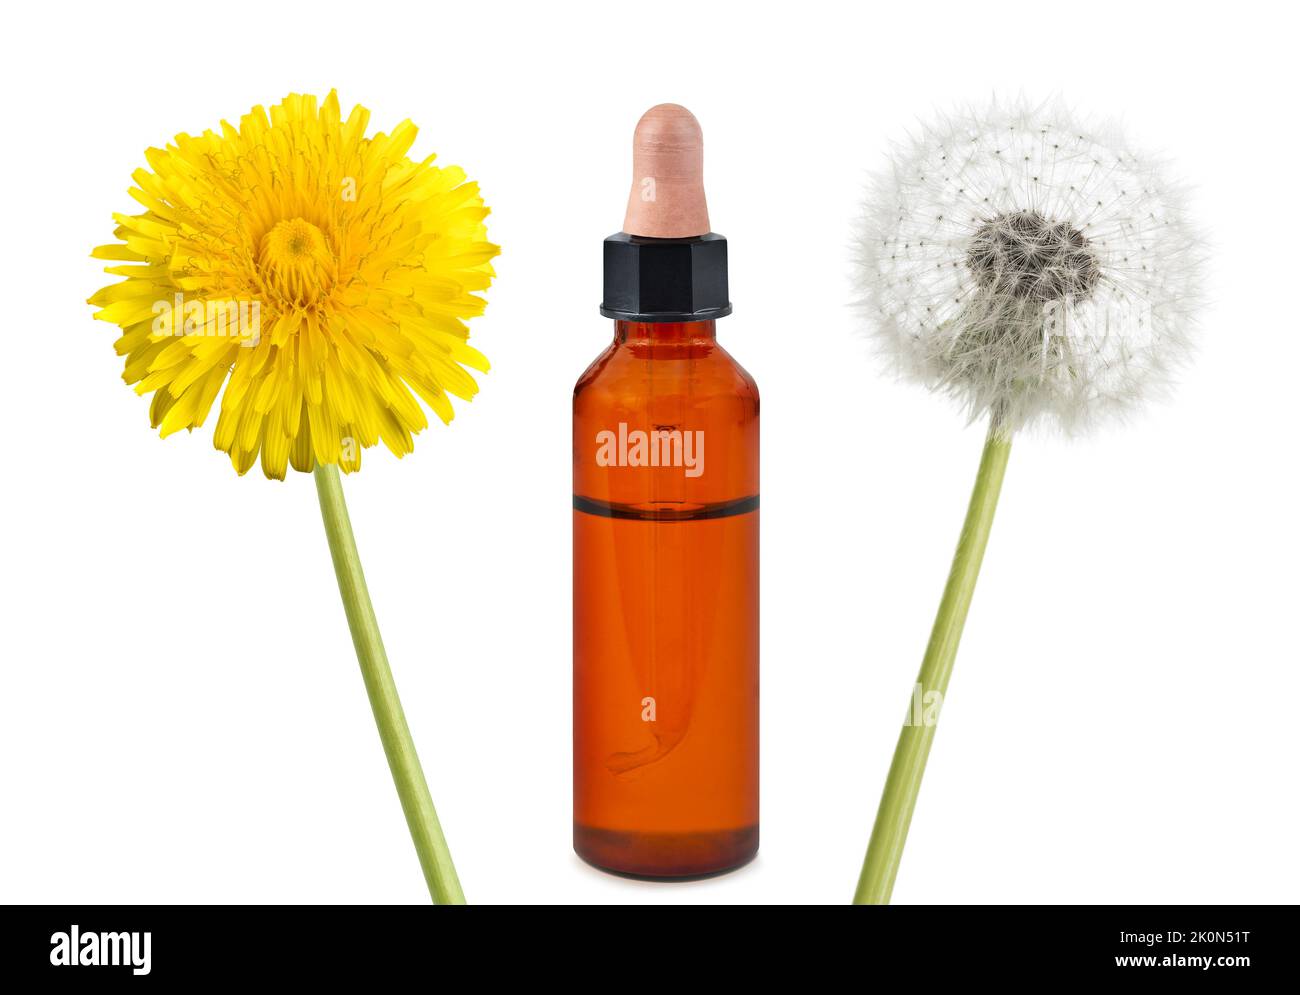 dandelion flowers and bottle with essence isolated on white background Stock Photo